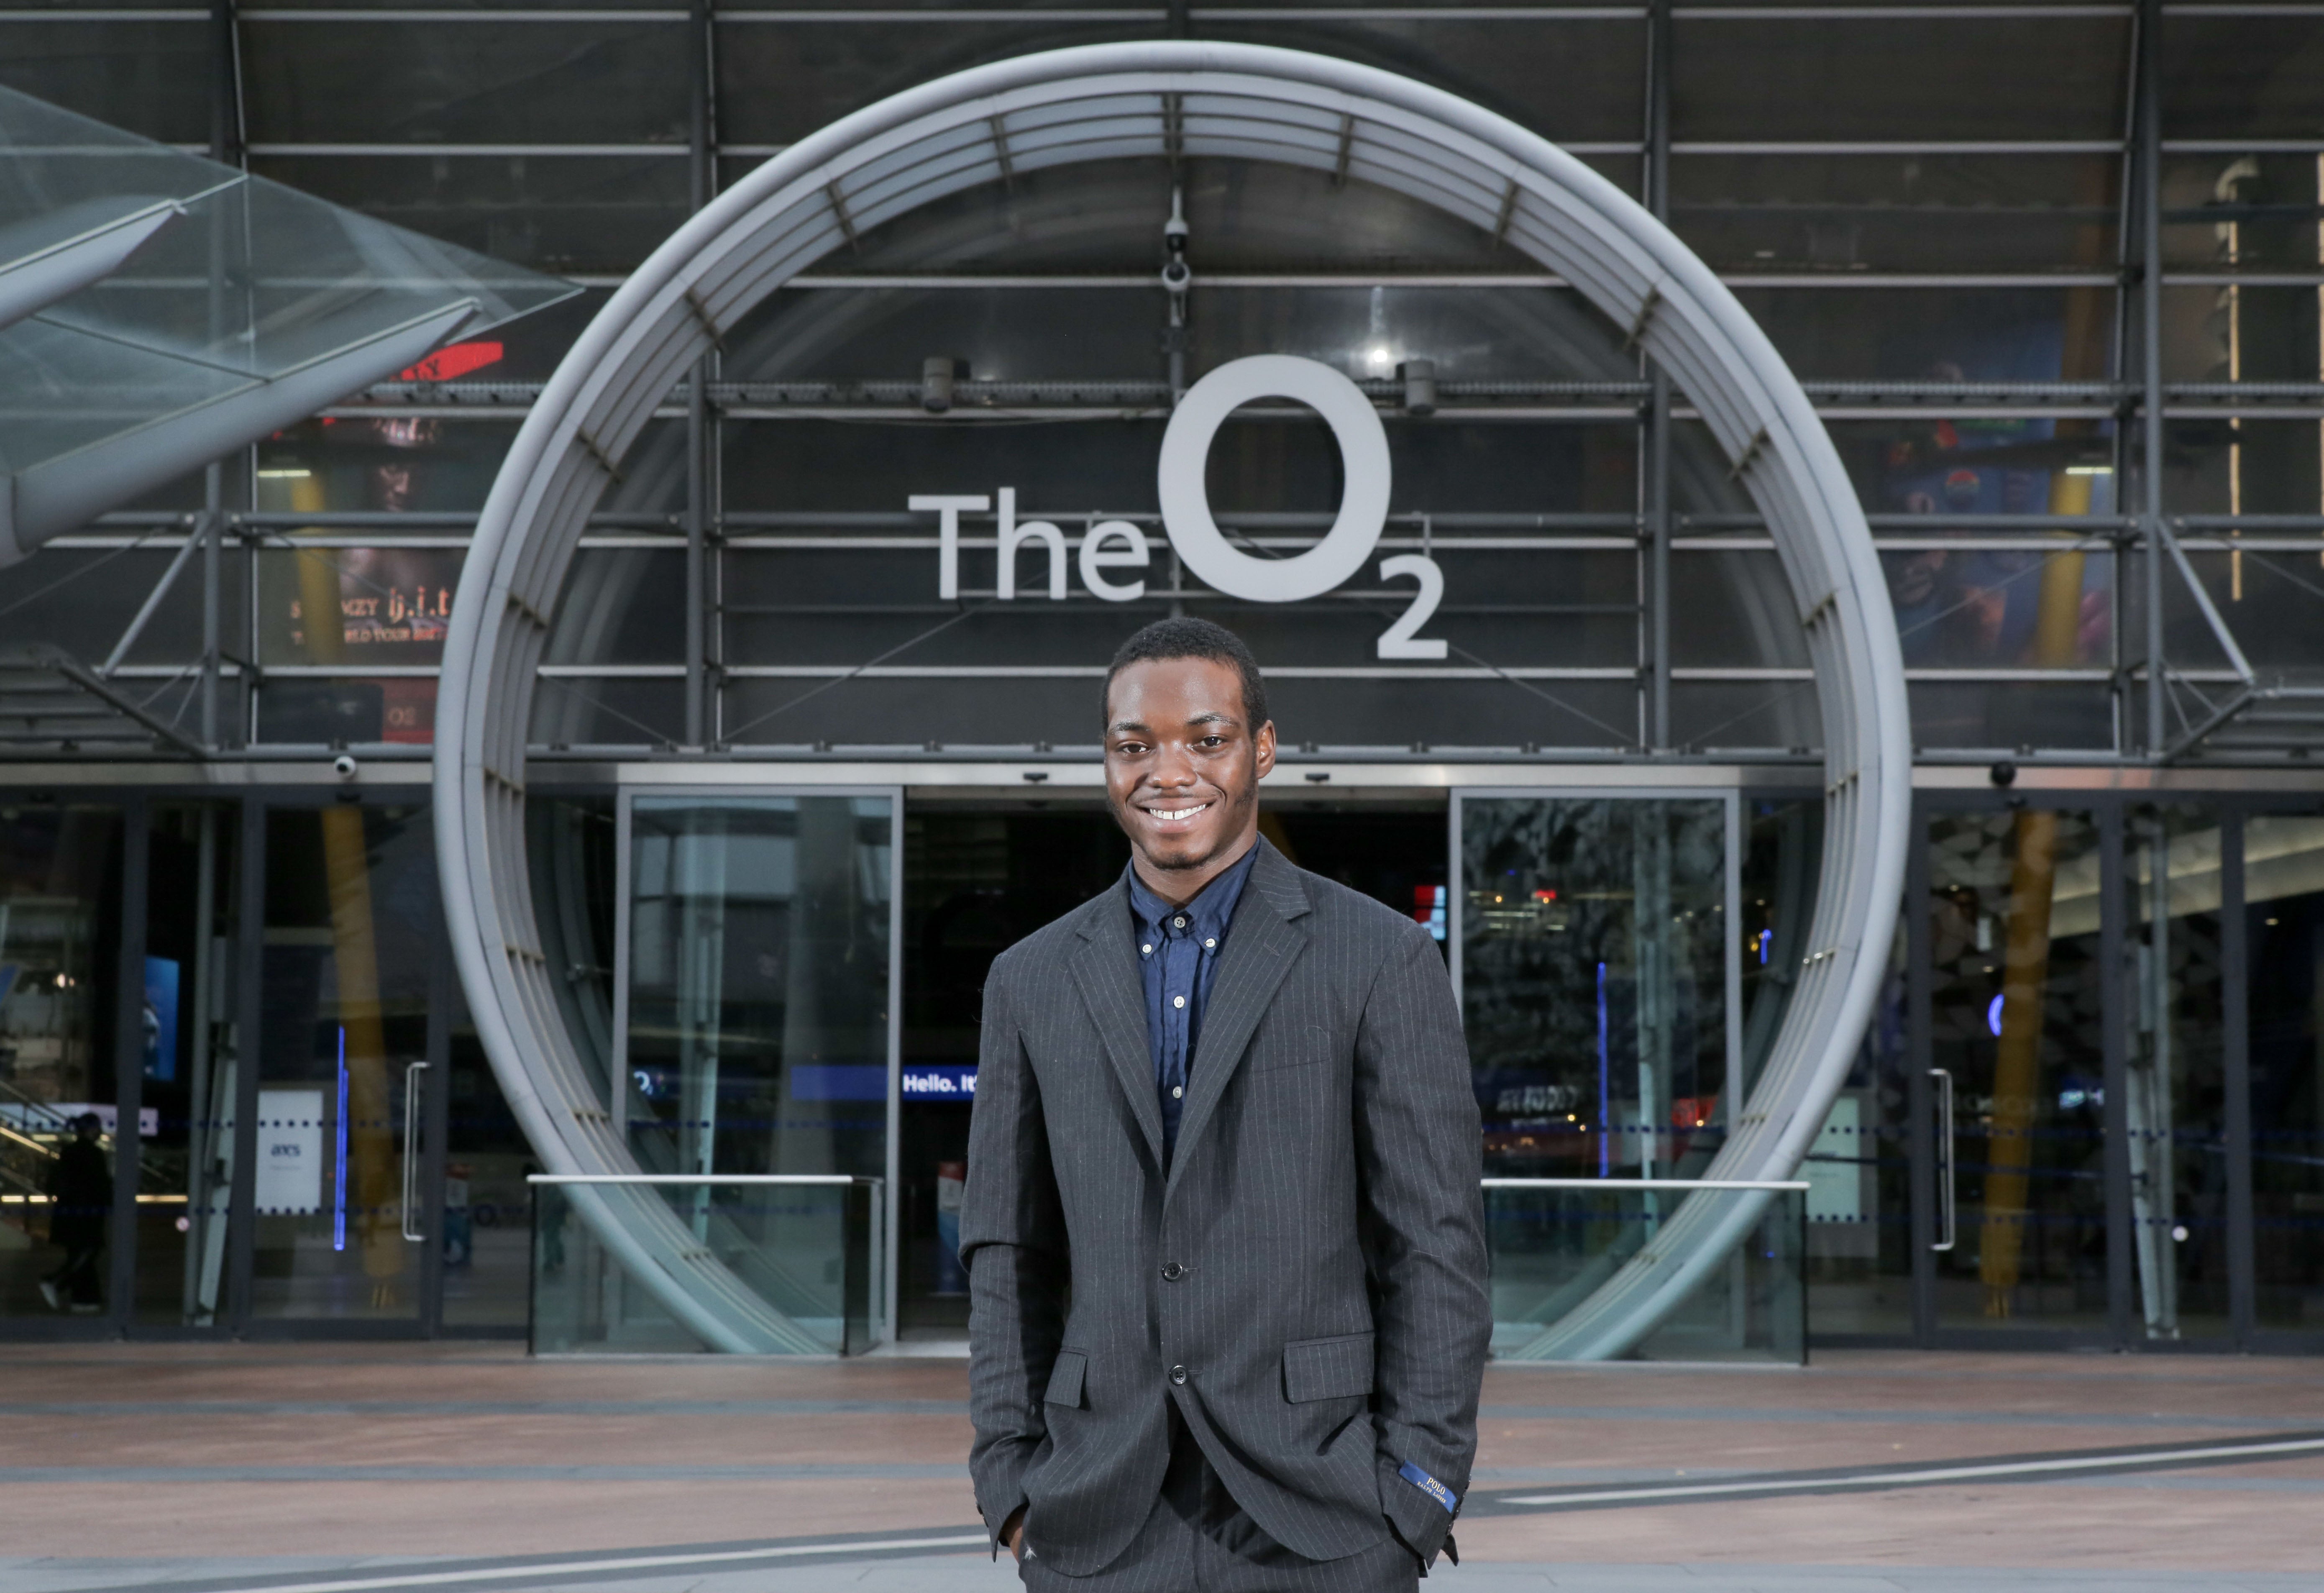 Devonte was given training through charity Springboard